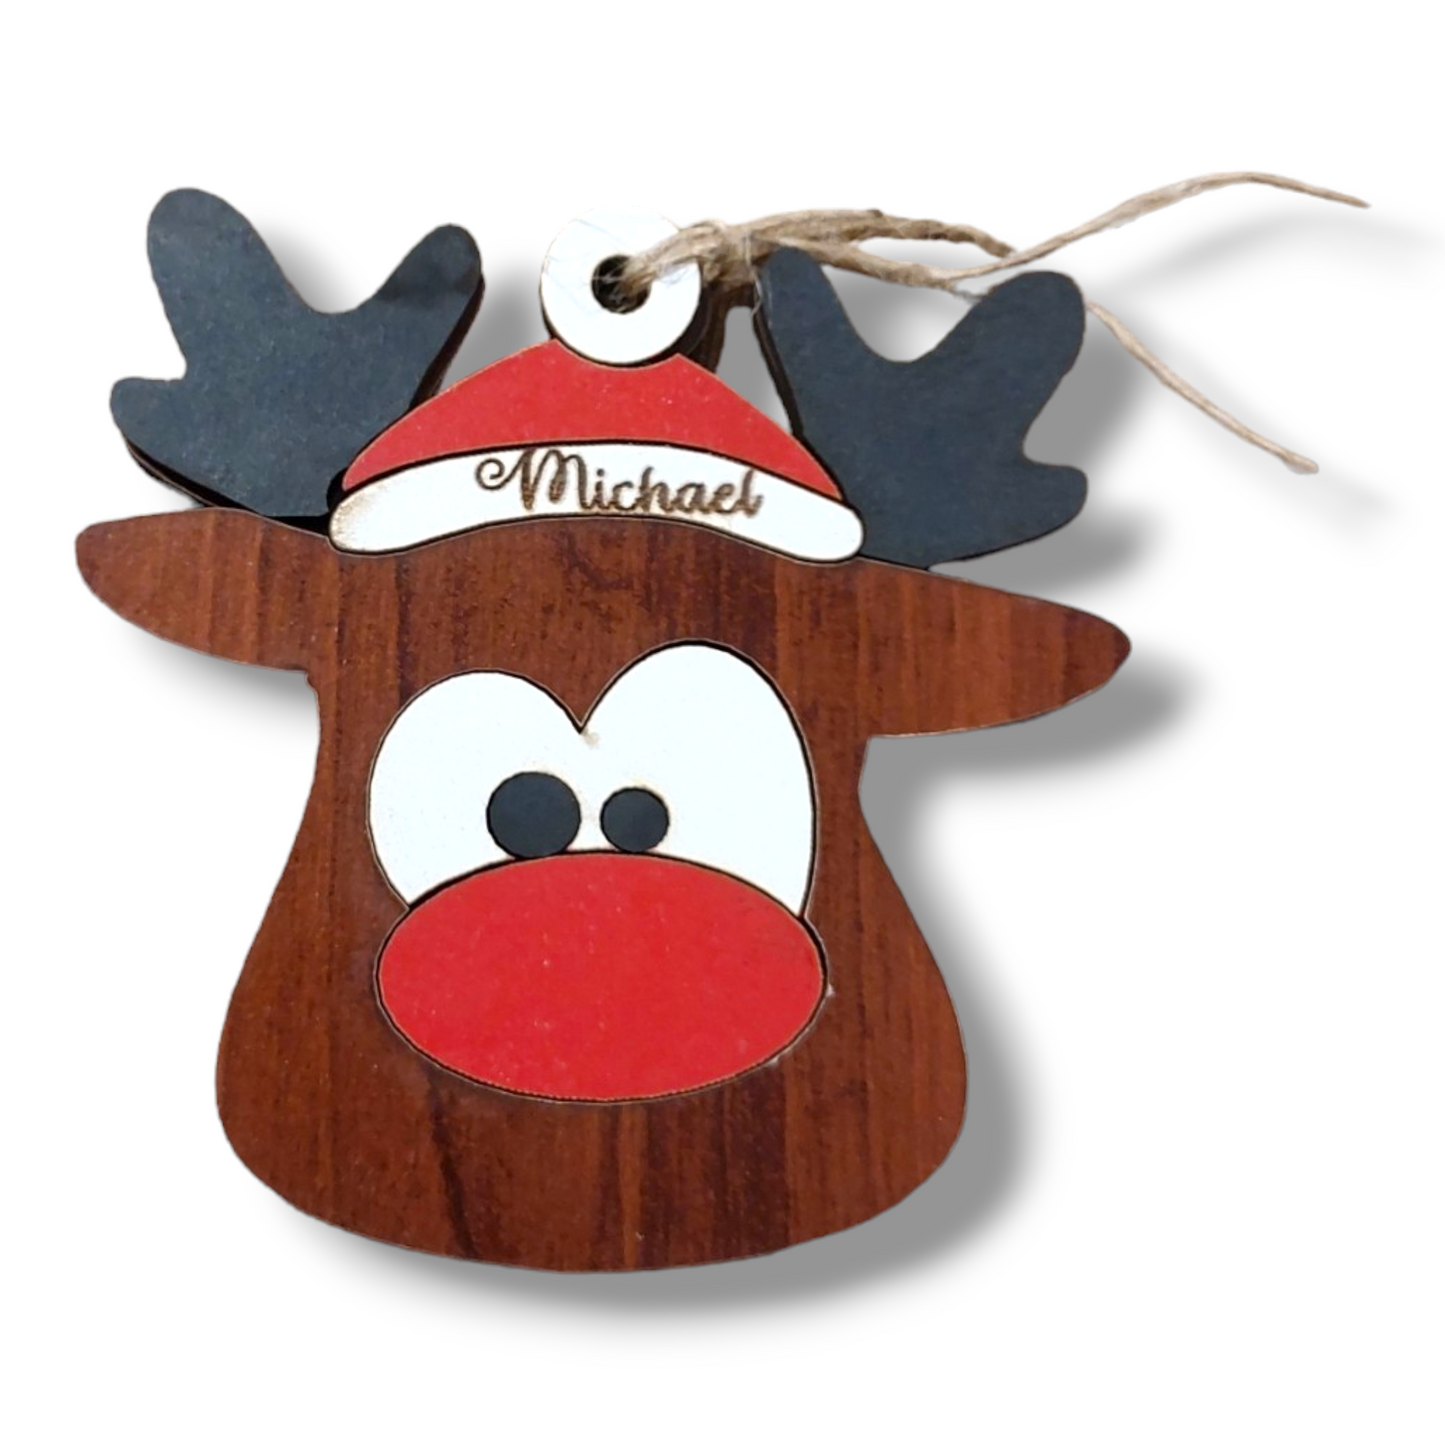 Wooden personalized Reindeer ornament